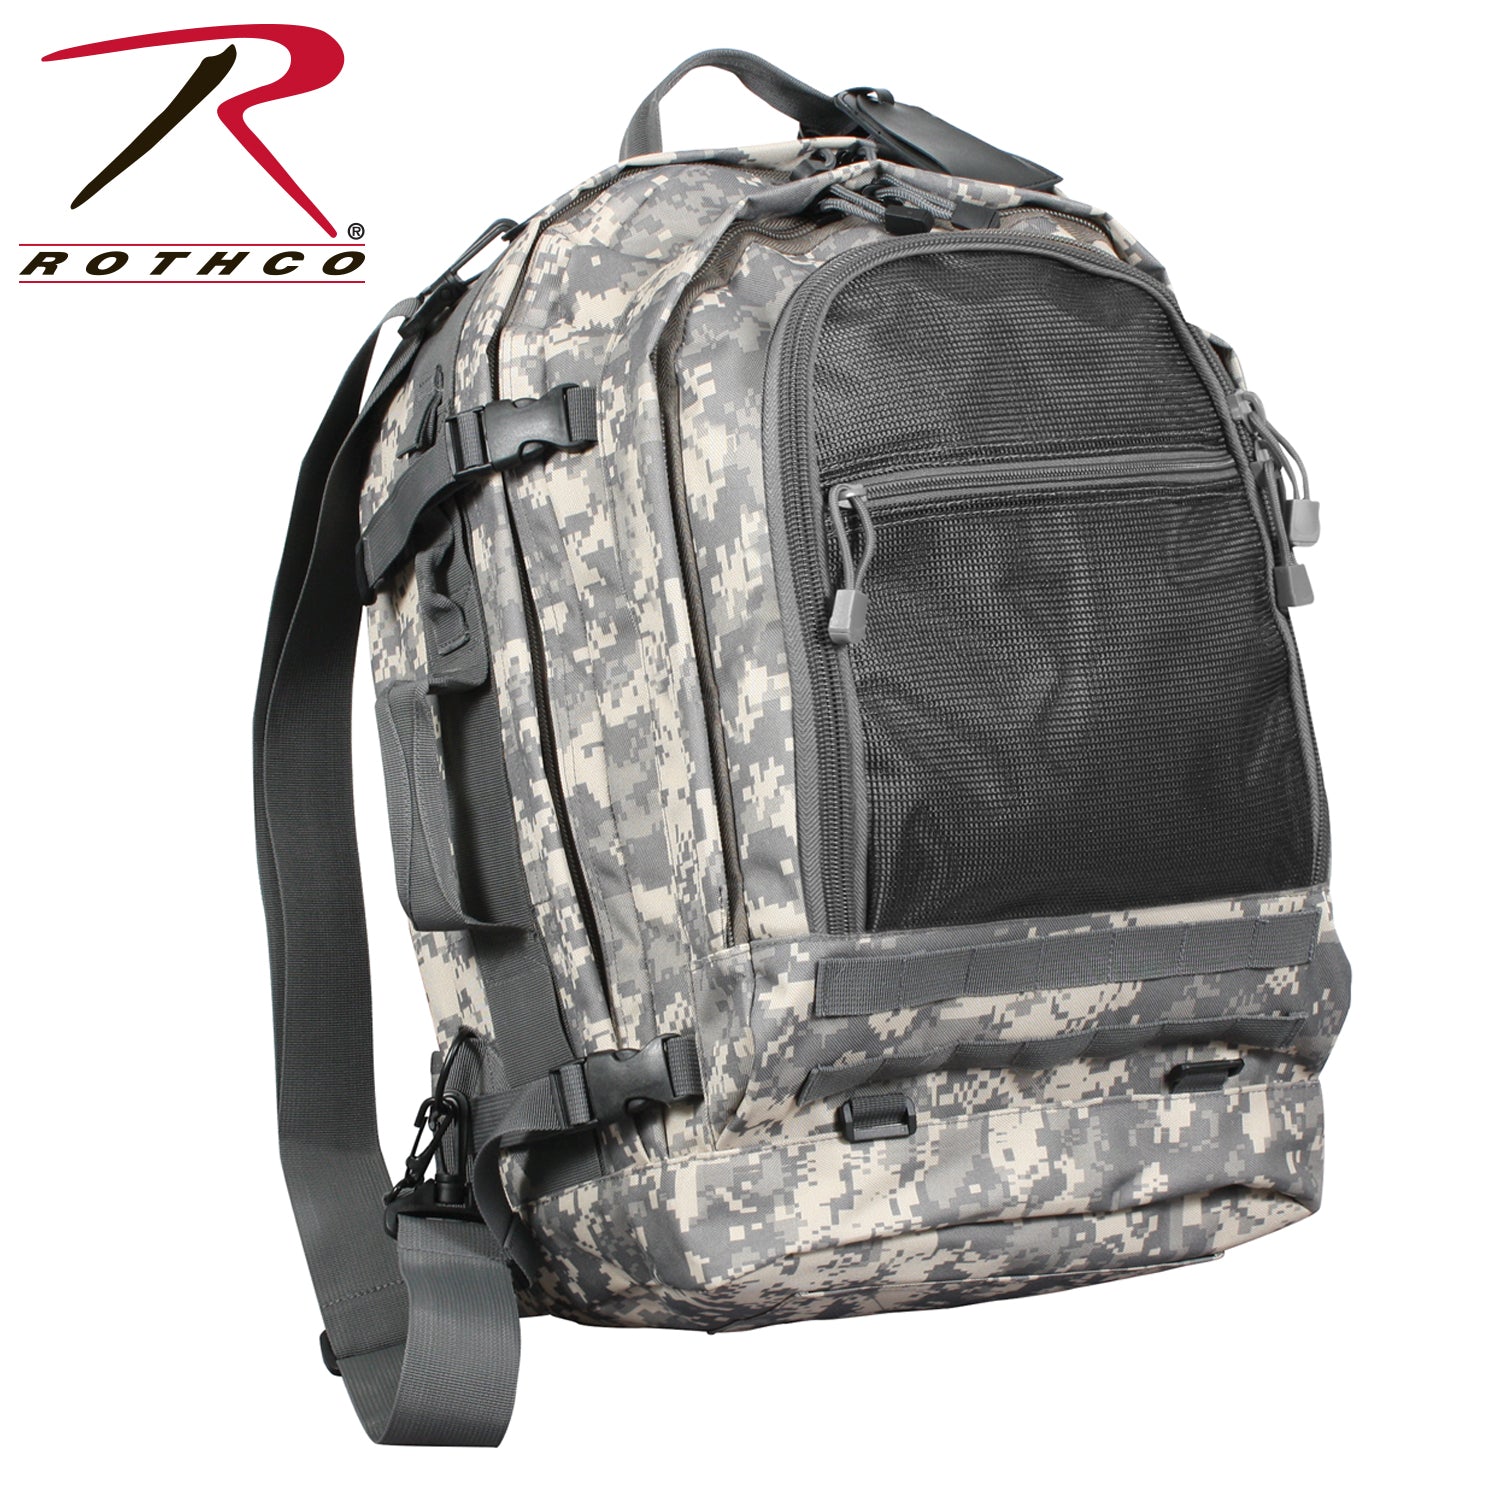 Milspec Move Out Tactical Travel Backpack Backpacks & Packs MilTac Tactical Military Outdoor Gear Australia